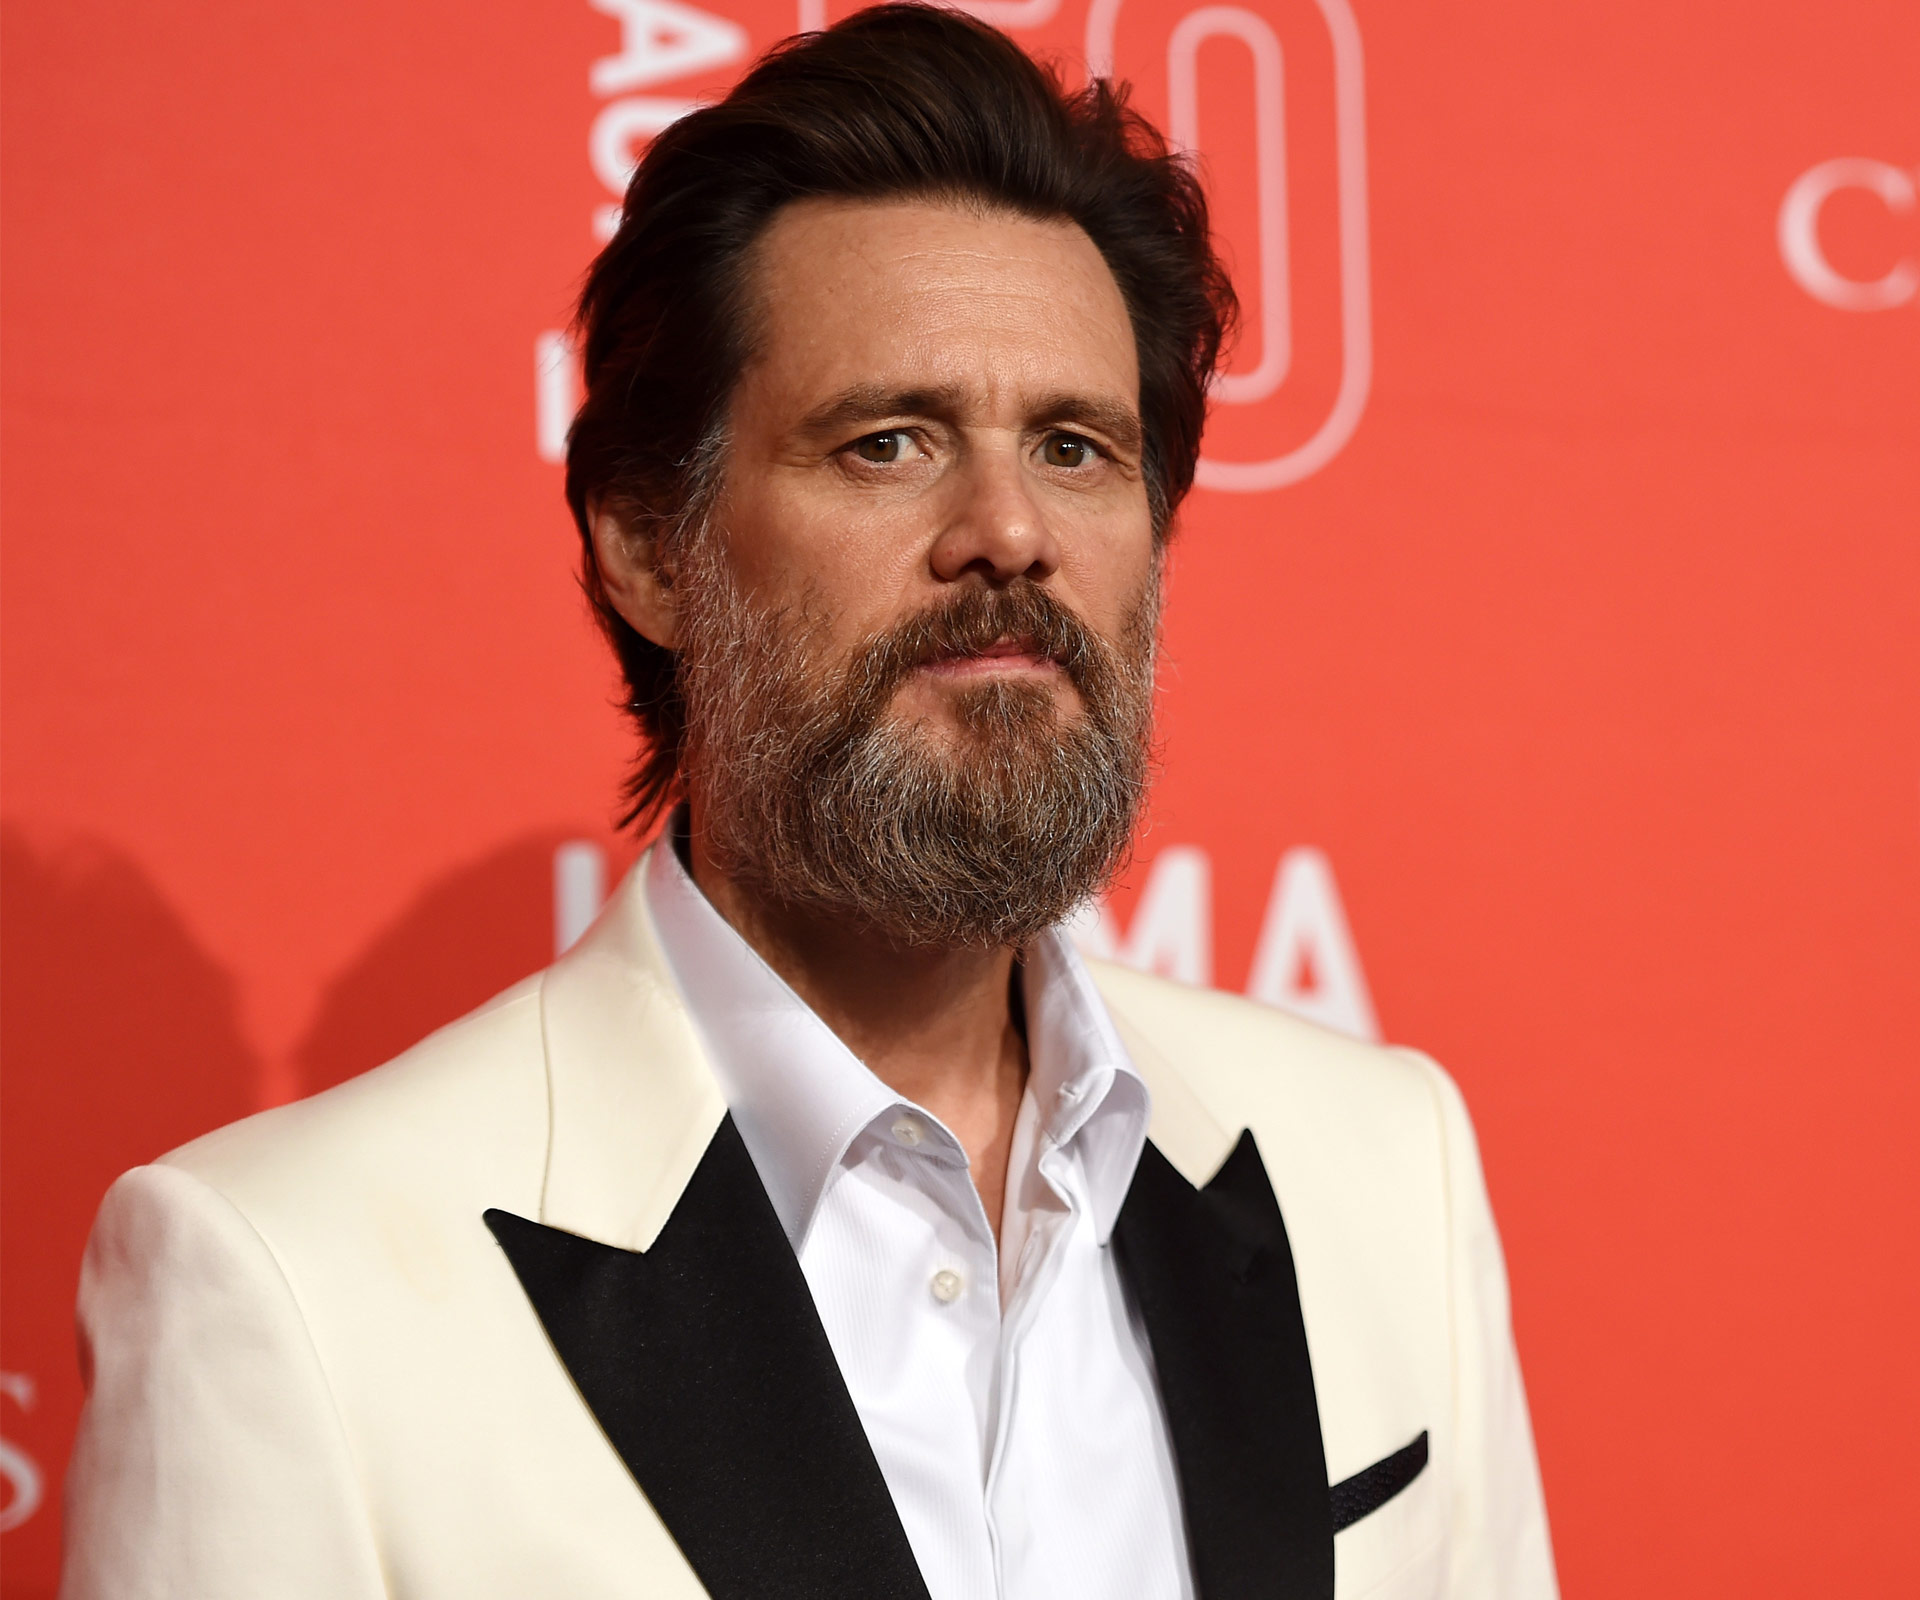 Jim Carrey responds to “evil” lawsuit over wrongful death of girlfriend Cathriona White